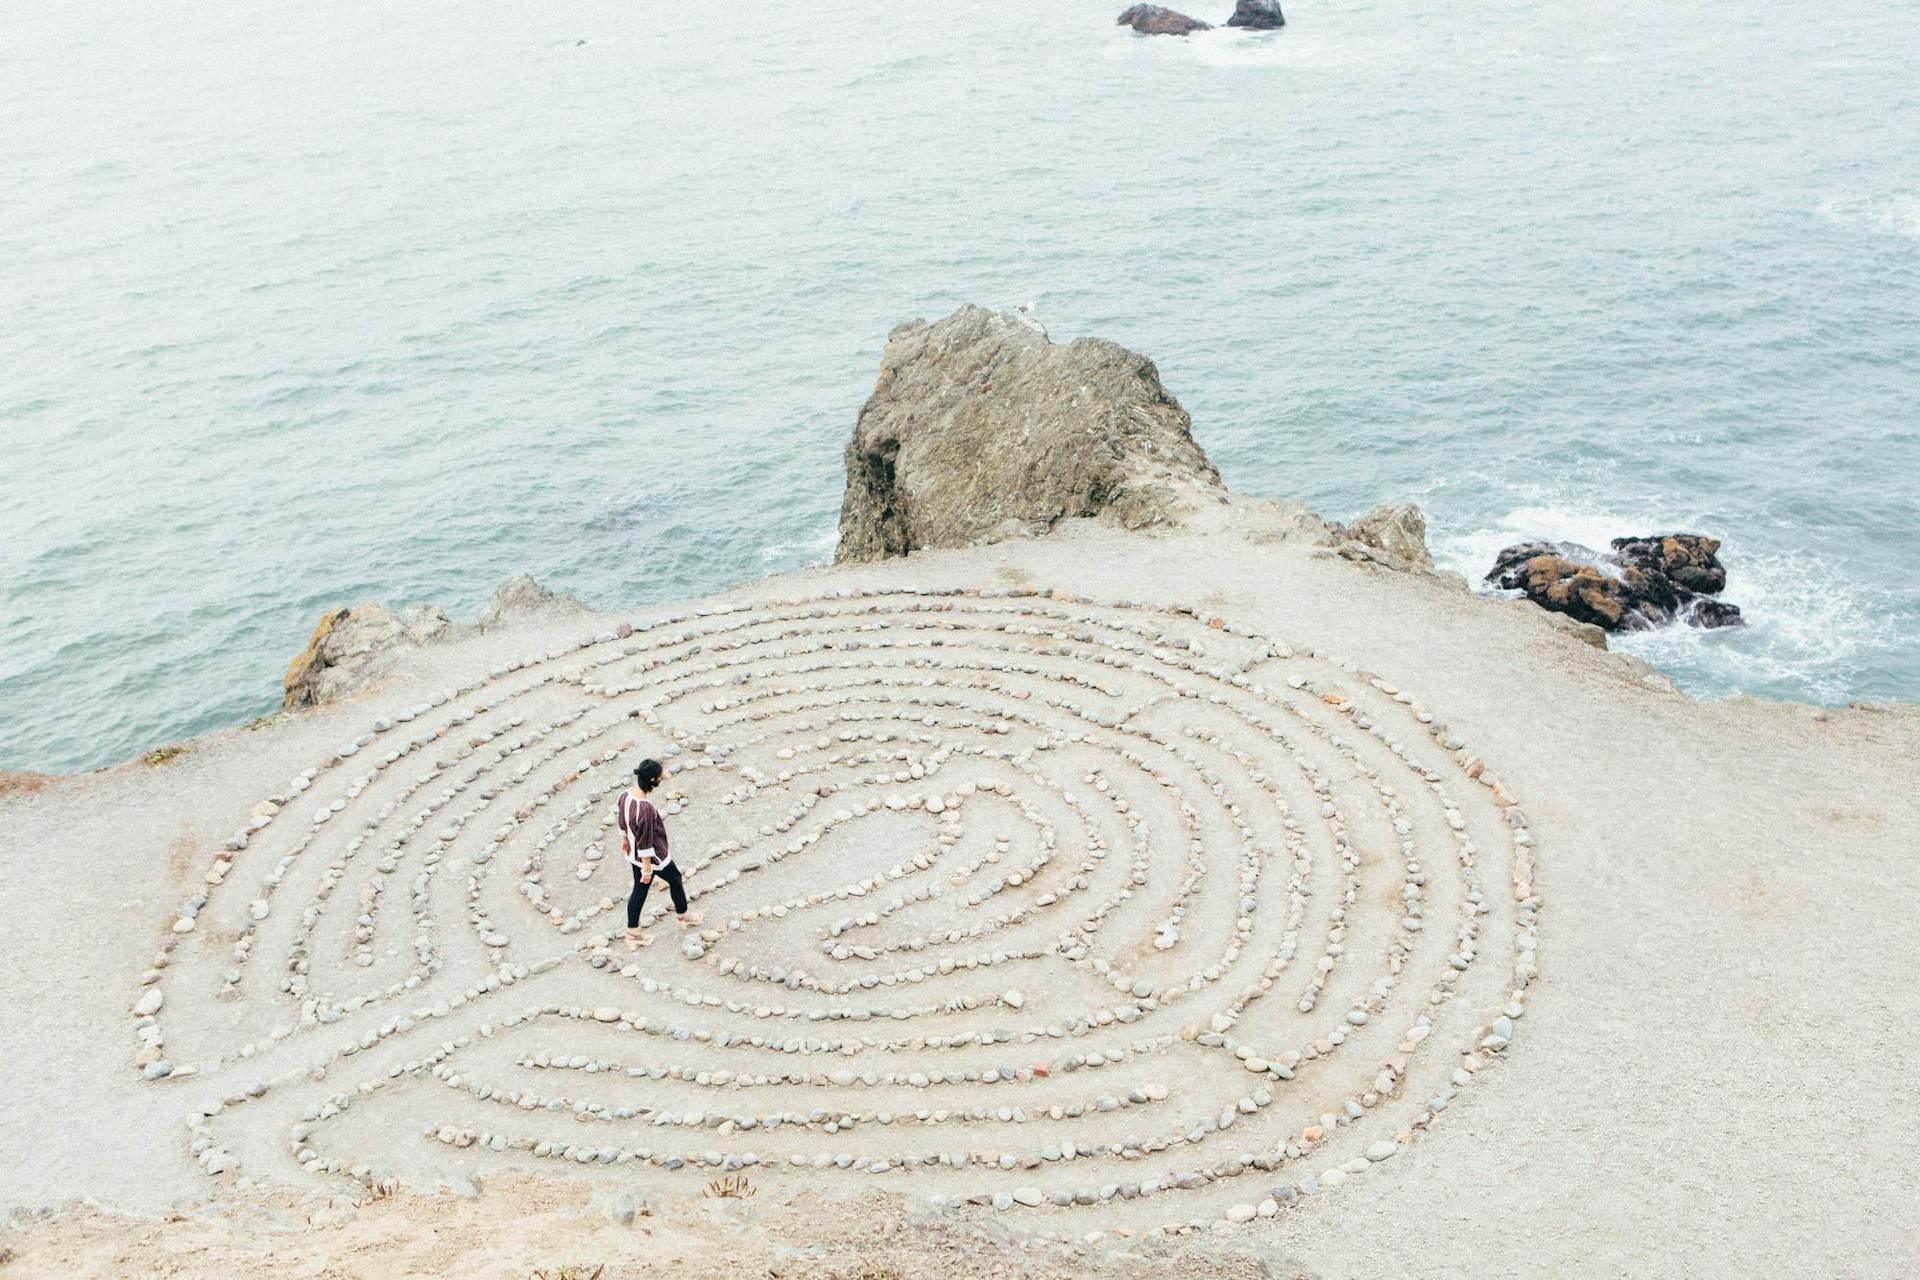 Spiral on stones near the sea, representing the subconscious mind